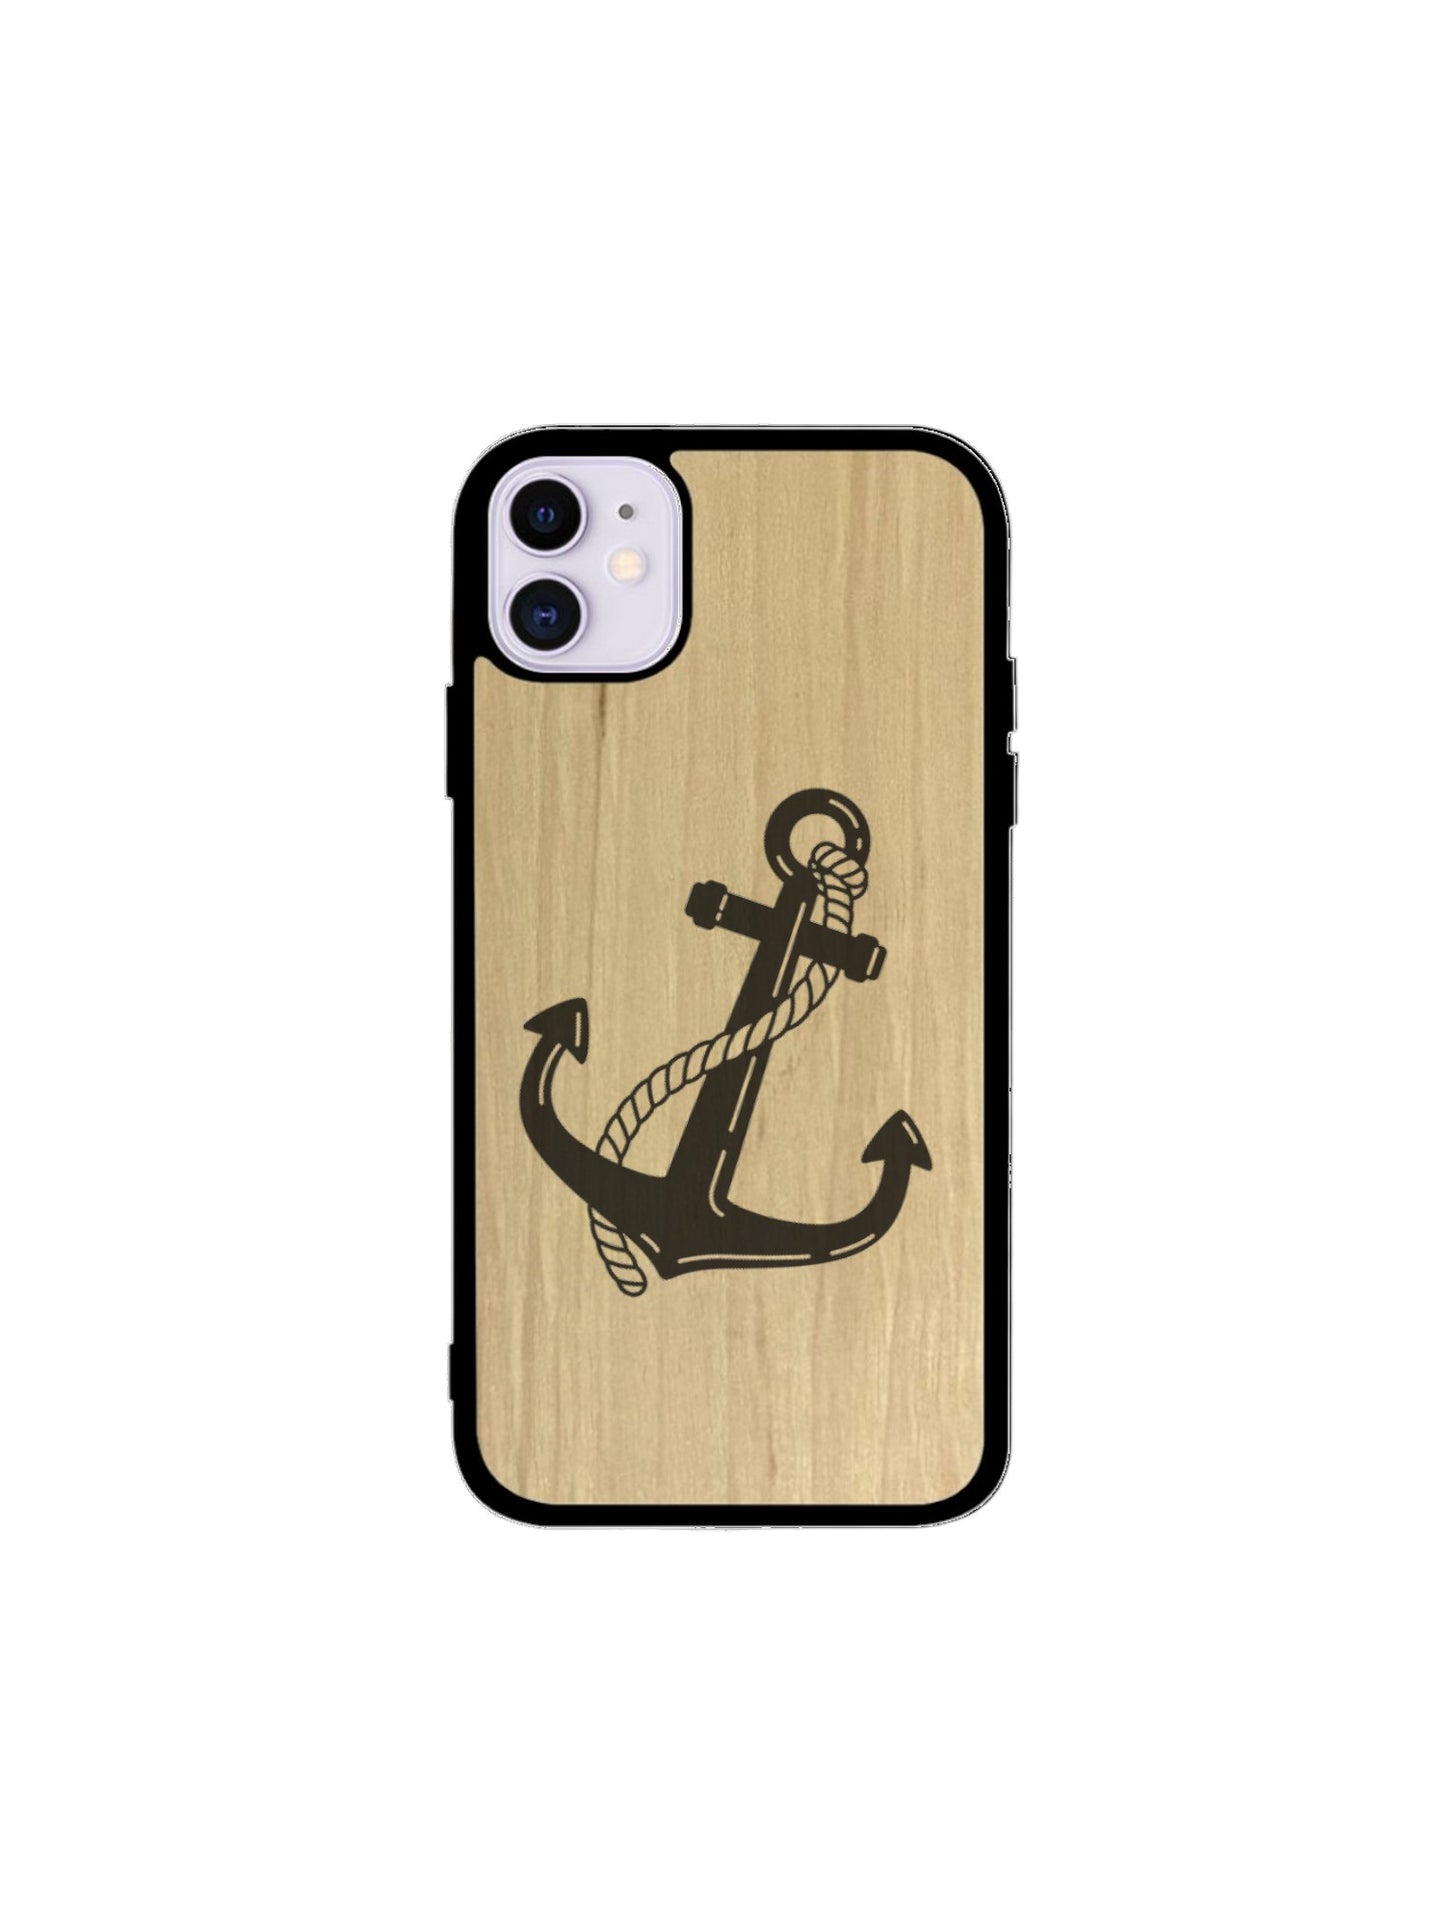 Iphone case - Boat anchor